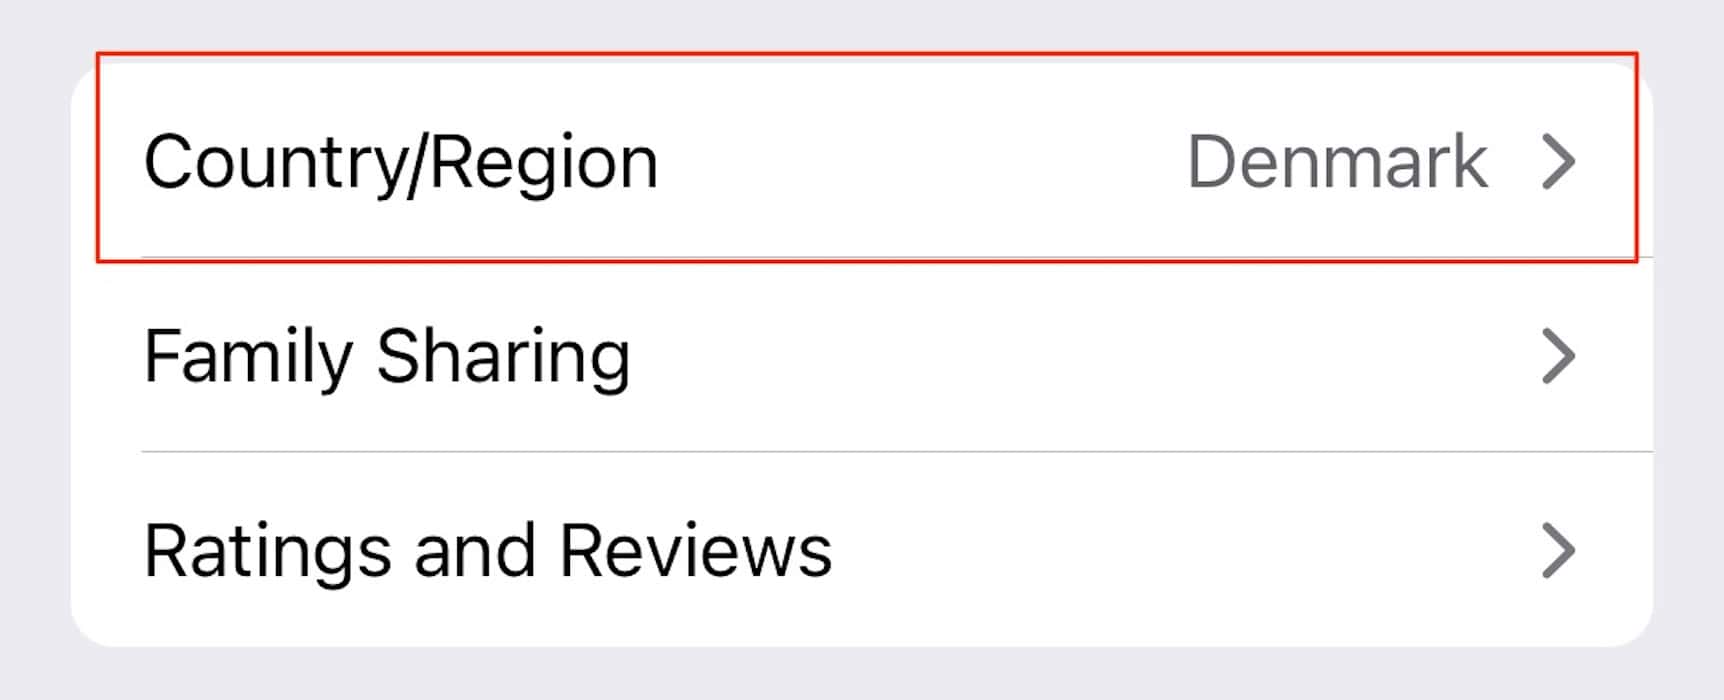 Select the Country/Region Tab